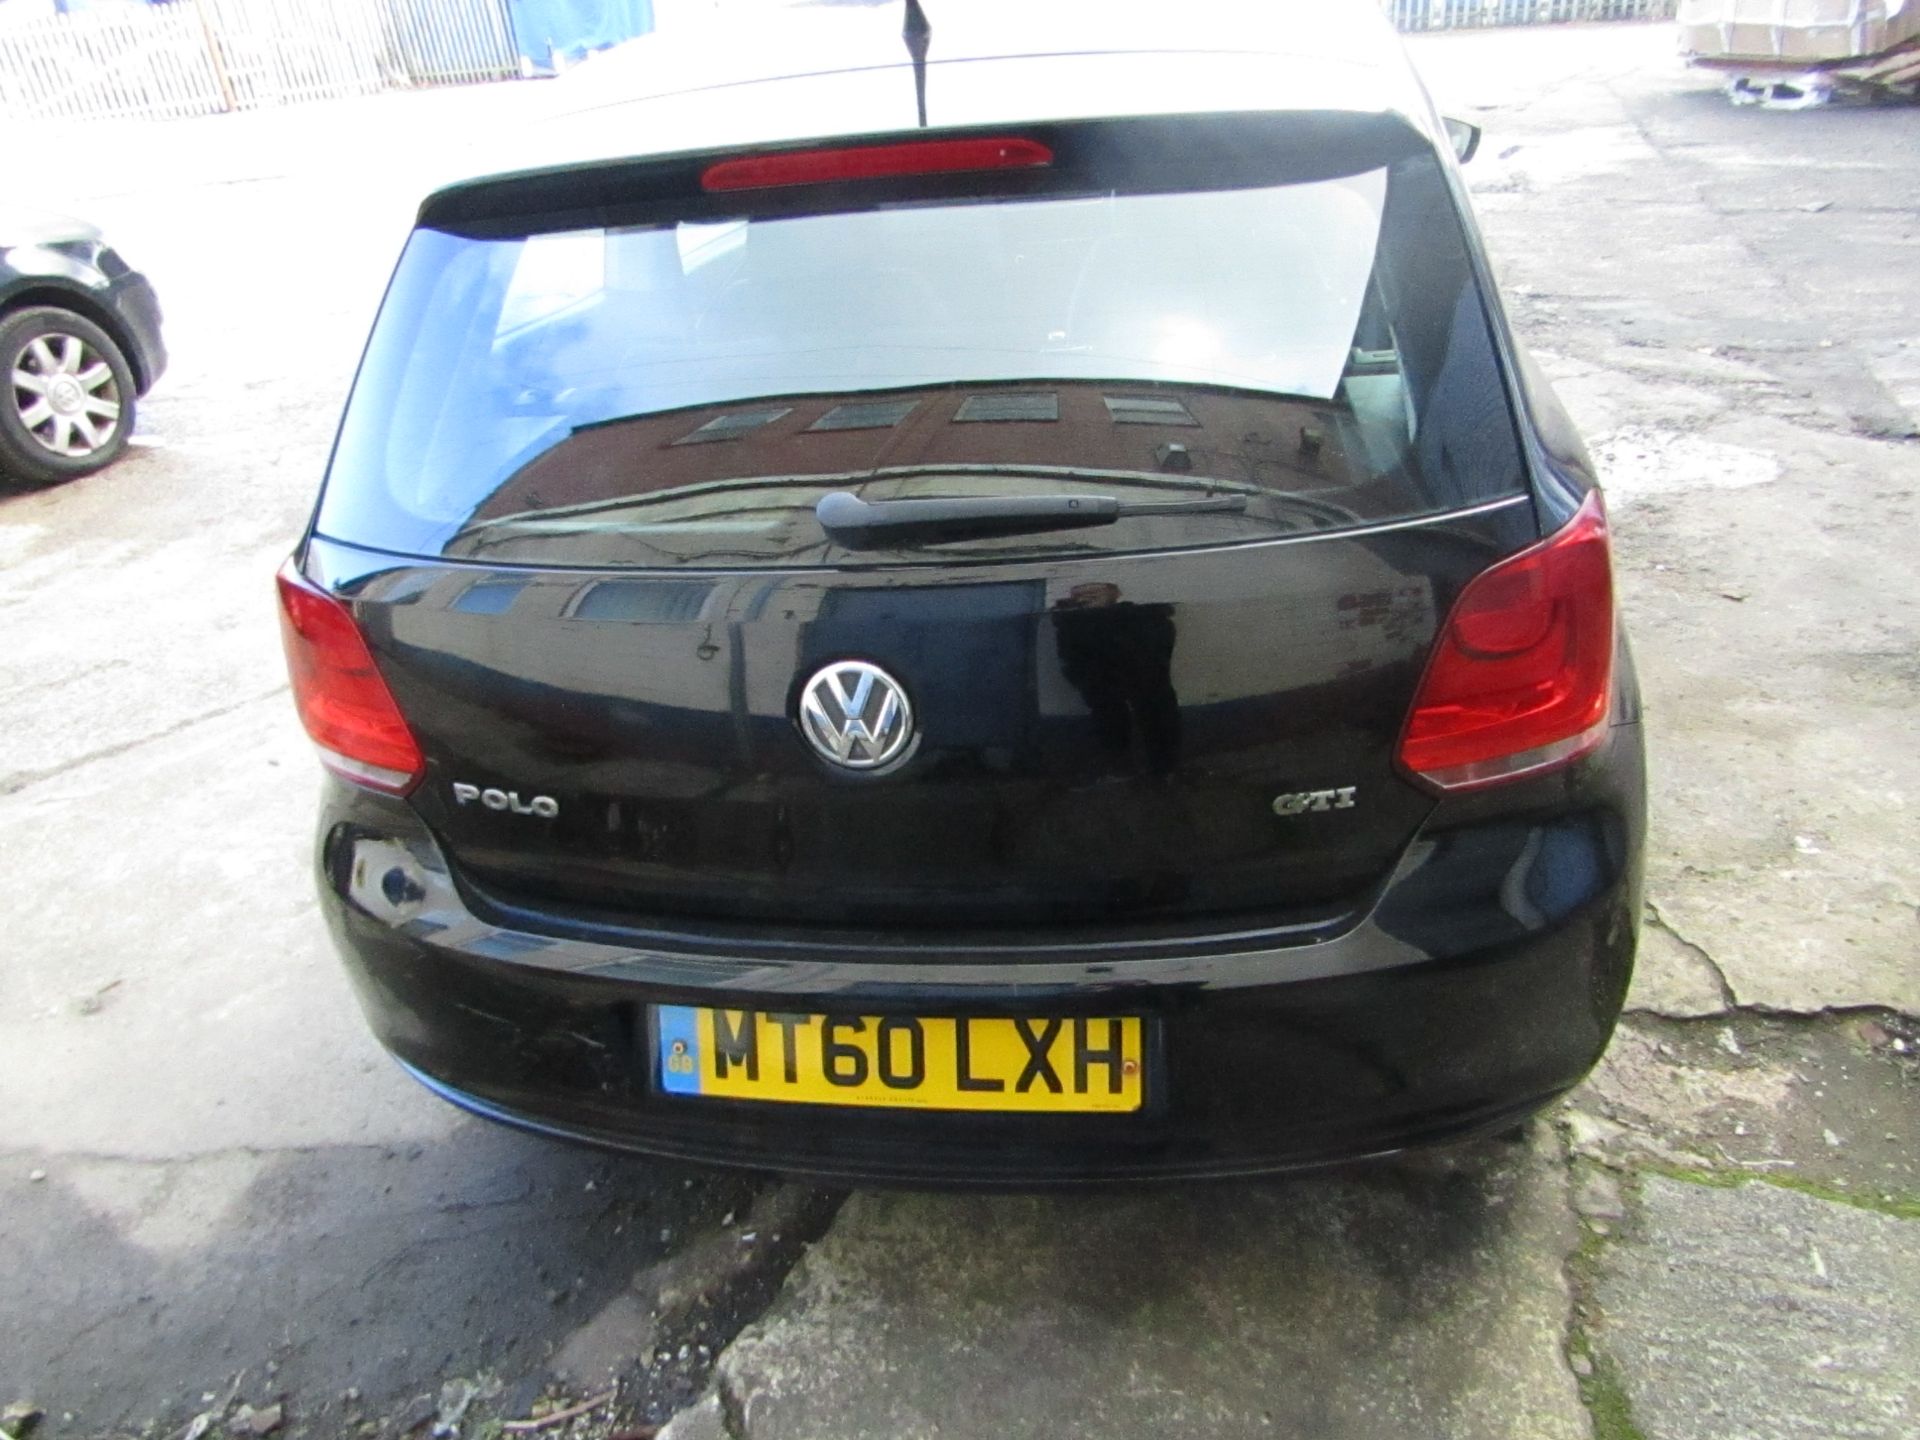 60 plate Volkswagen Polo S 70, 1.2i, 119,551 miles (unchecked), MOT Until 9th May 2023, Starts and - Image 2 of 15